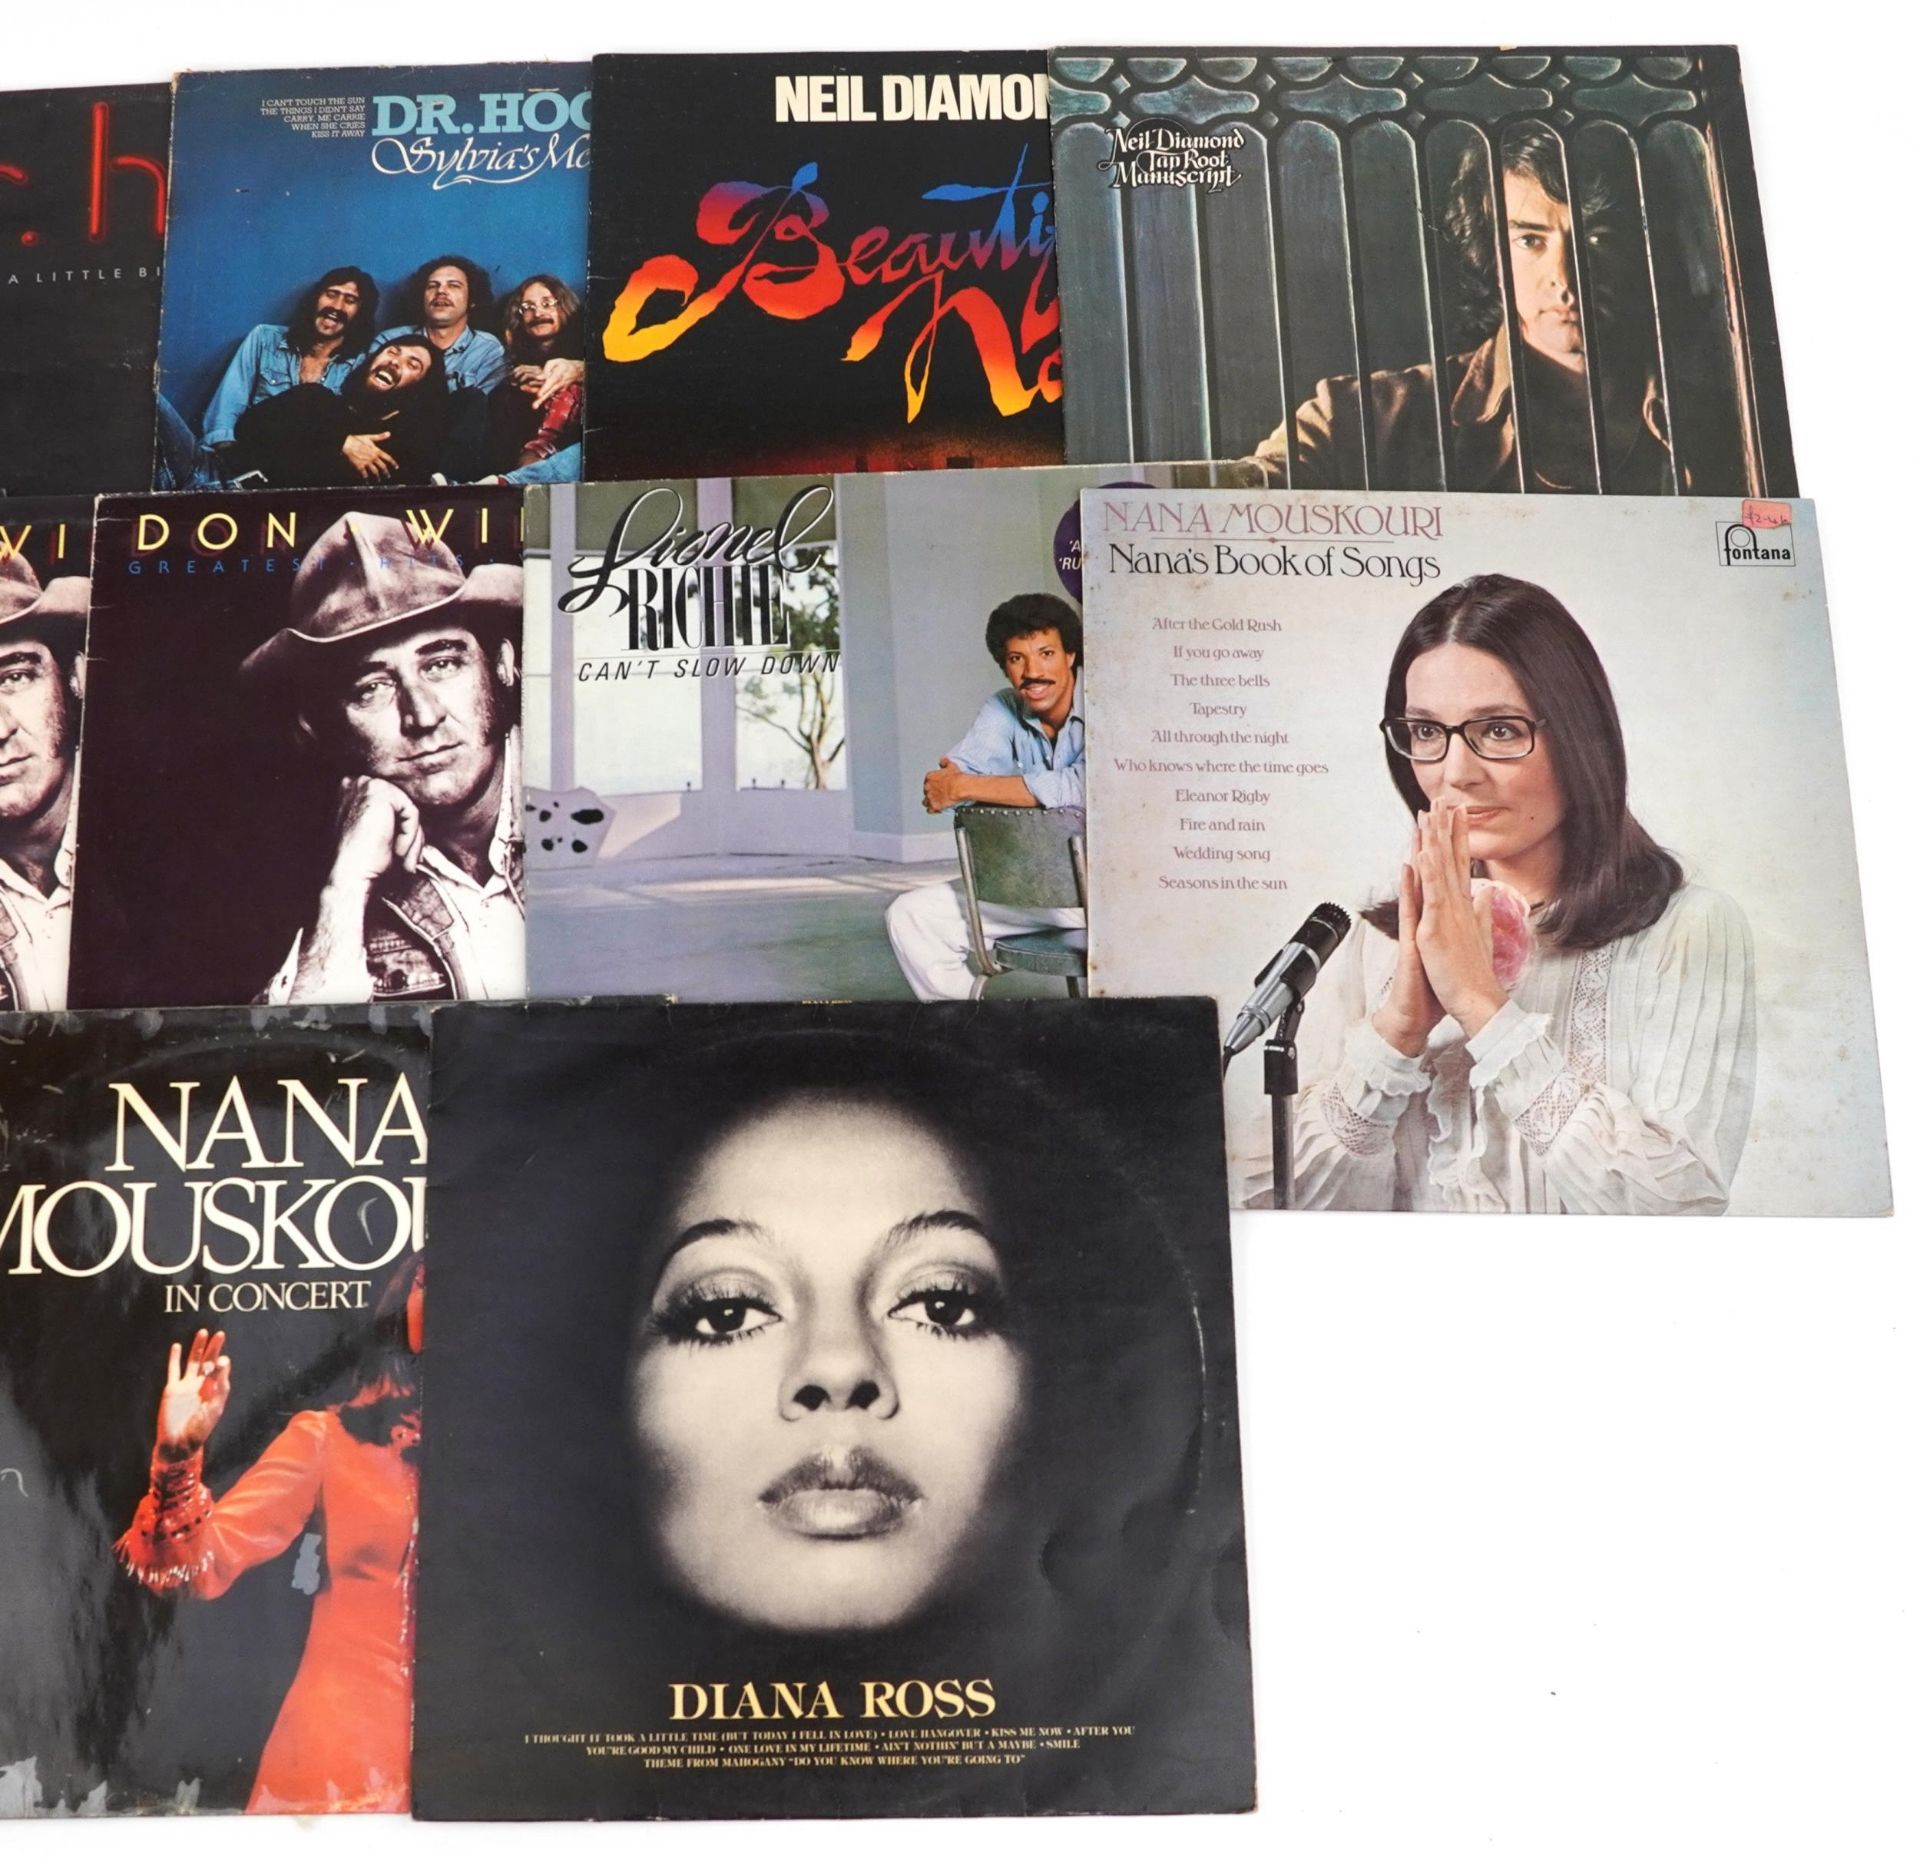 Vinyl LP records including Billy Joel, Dr Hook, Don Williams and Nana Mouskouri - Image 3 of 3